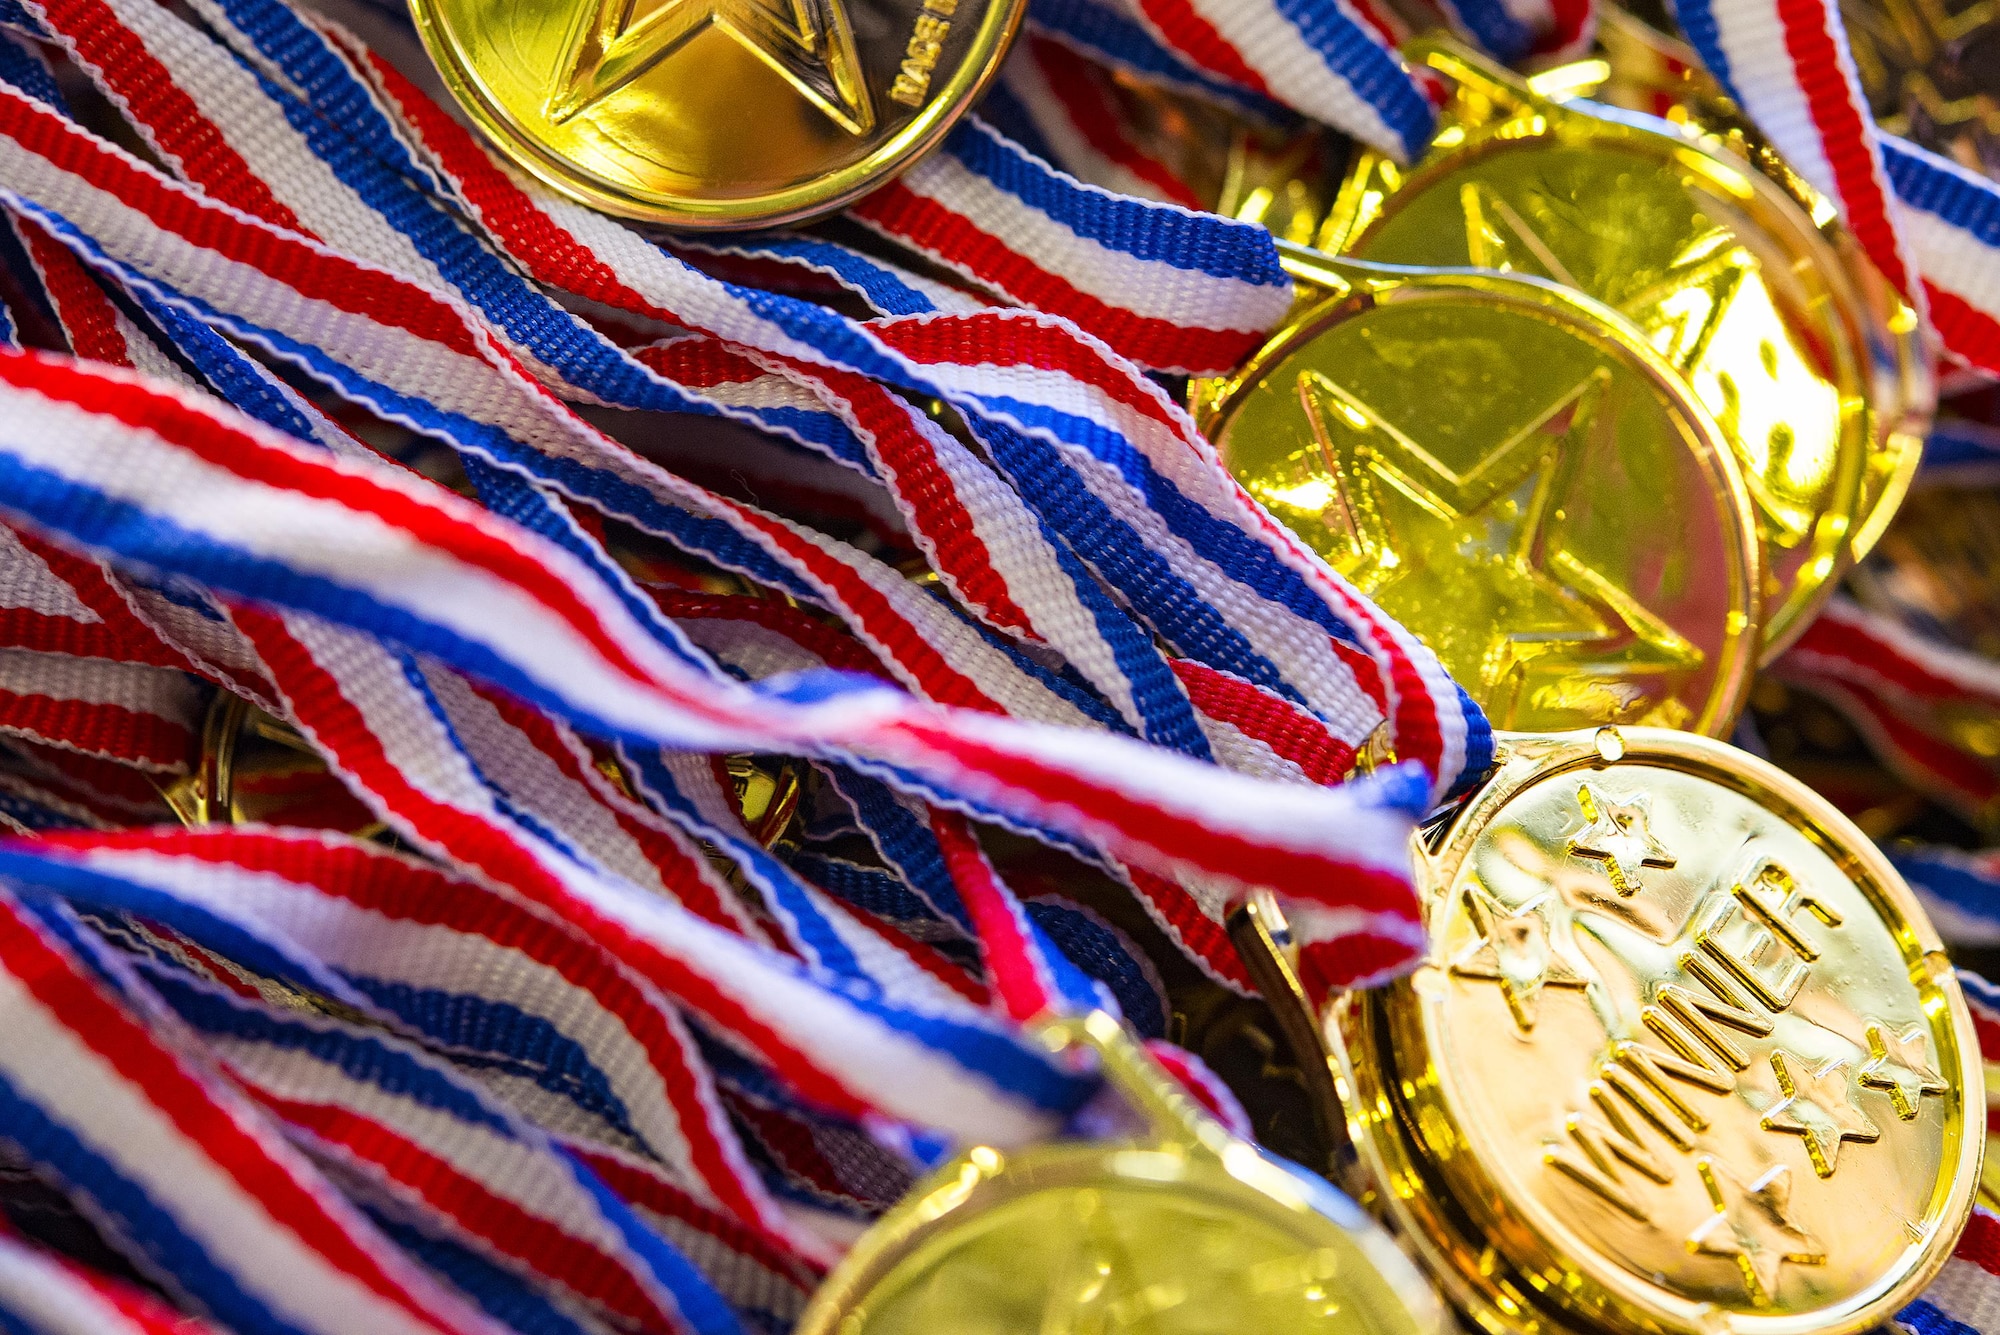 Medals rest in a pile in the Youth Center during Olympic Week, June 15, 2017, at Moody Air Force Base, Ga. The goal of Olympic Week was to promote unity and healthy lifestyles. (U.S. Air Force Photo by Airman 1st Class Erick Requadt)